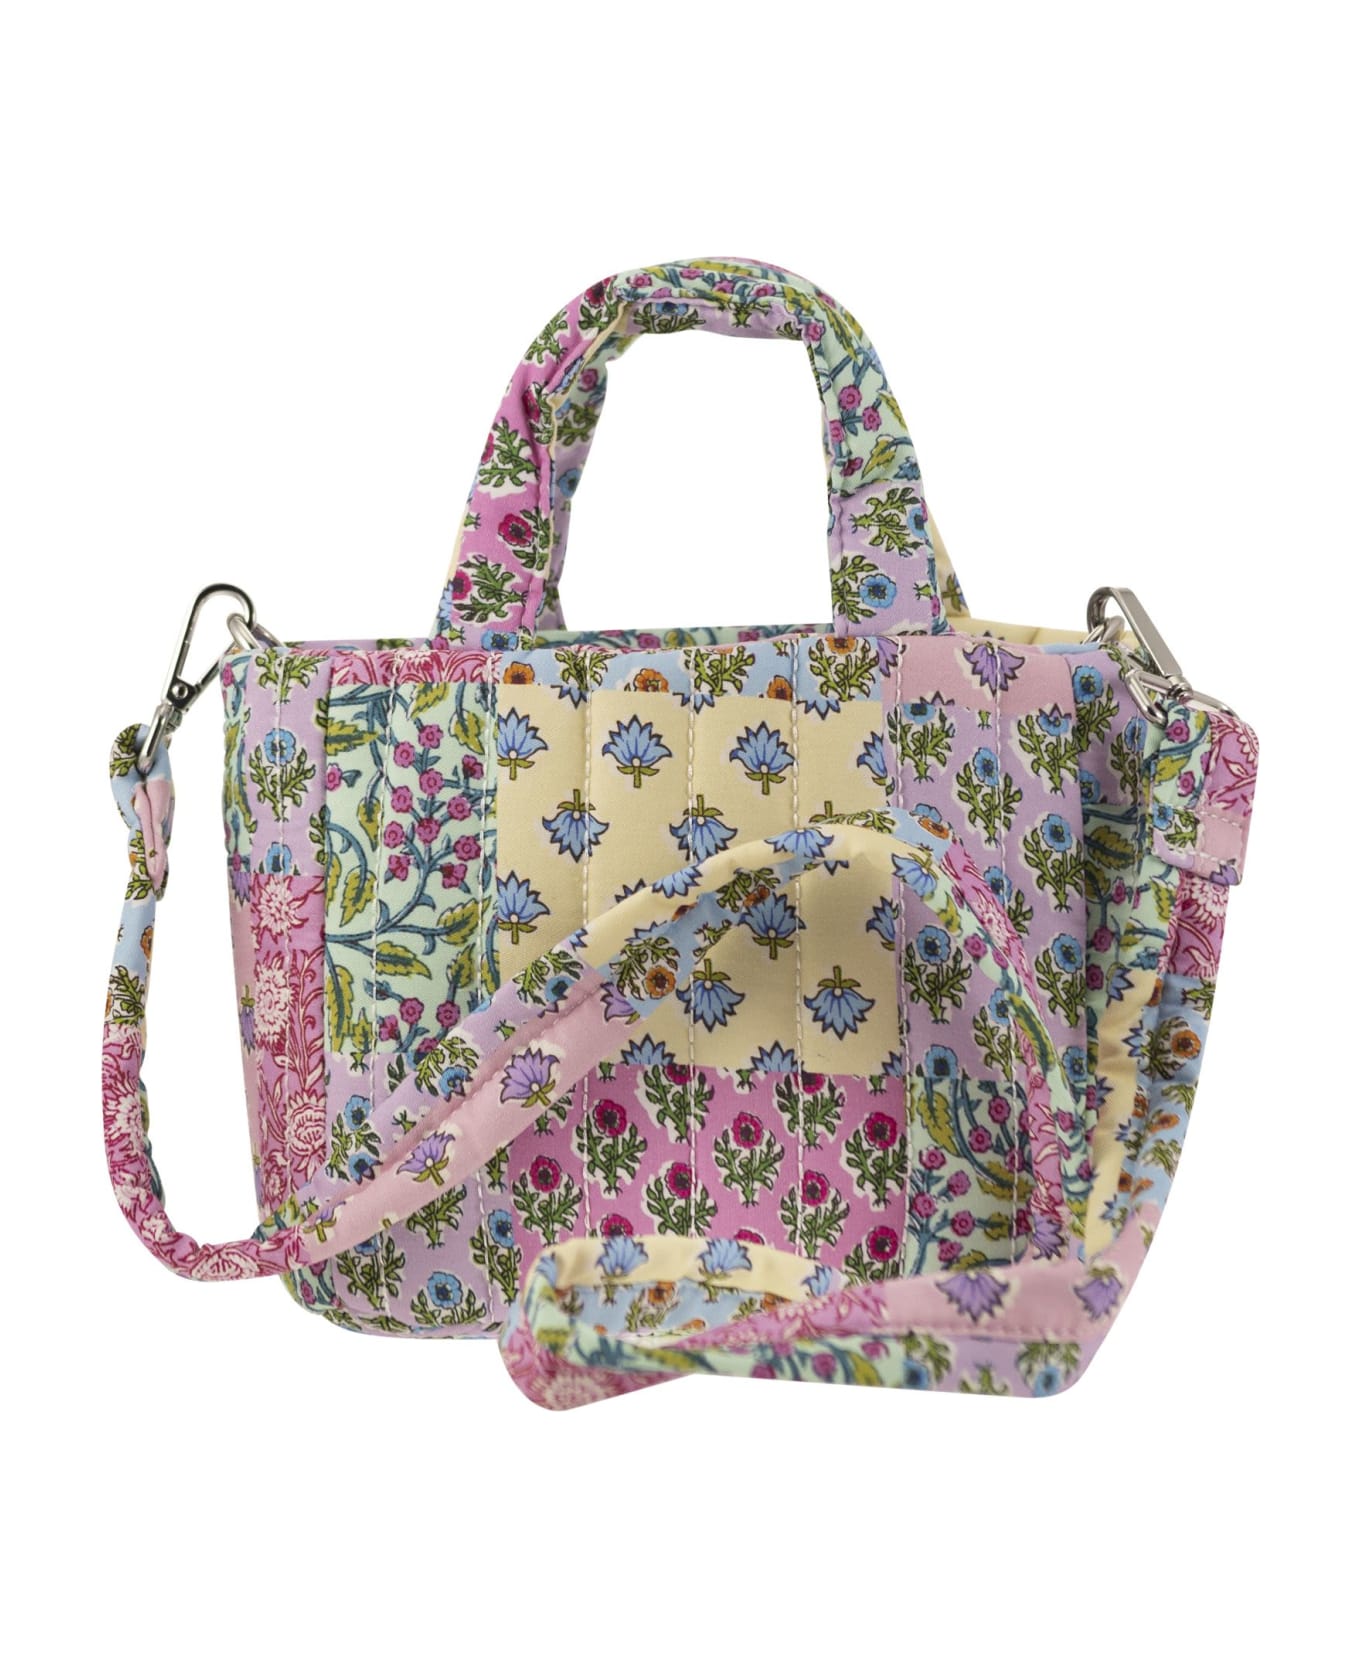 MC2 Saint Barth Soft Tote Mini Quilted Bag With Flowers - Multicolor